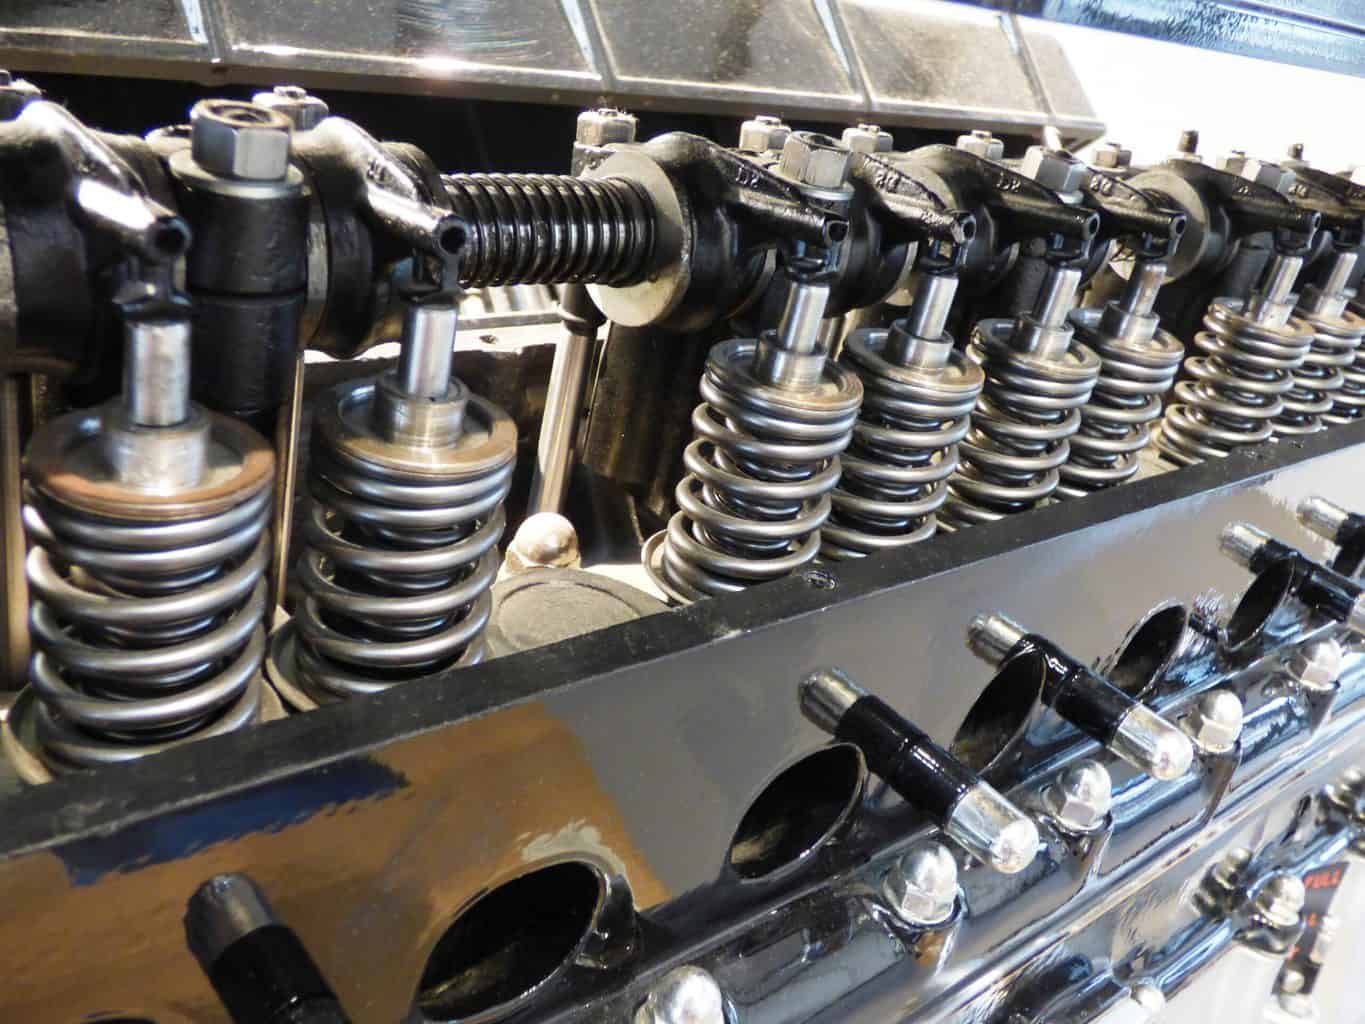 Automotive cyliners of a car engine